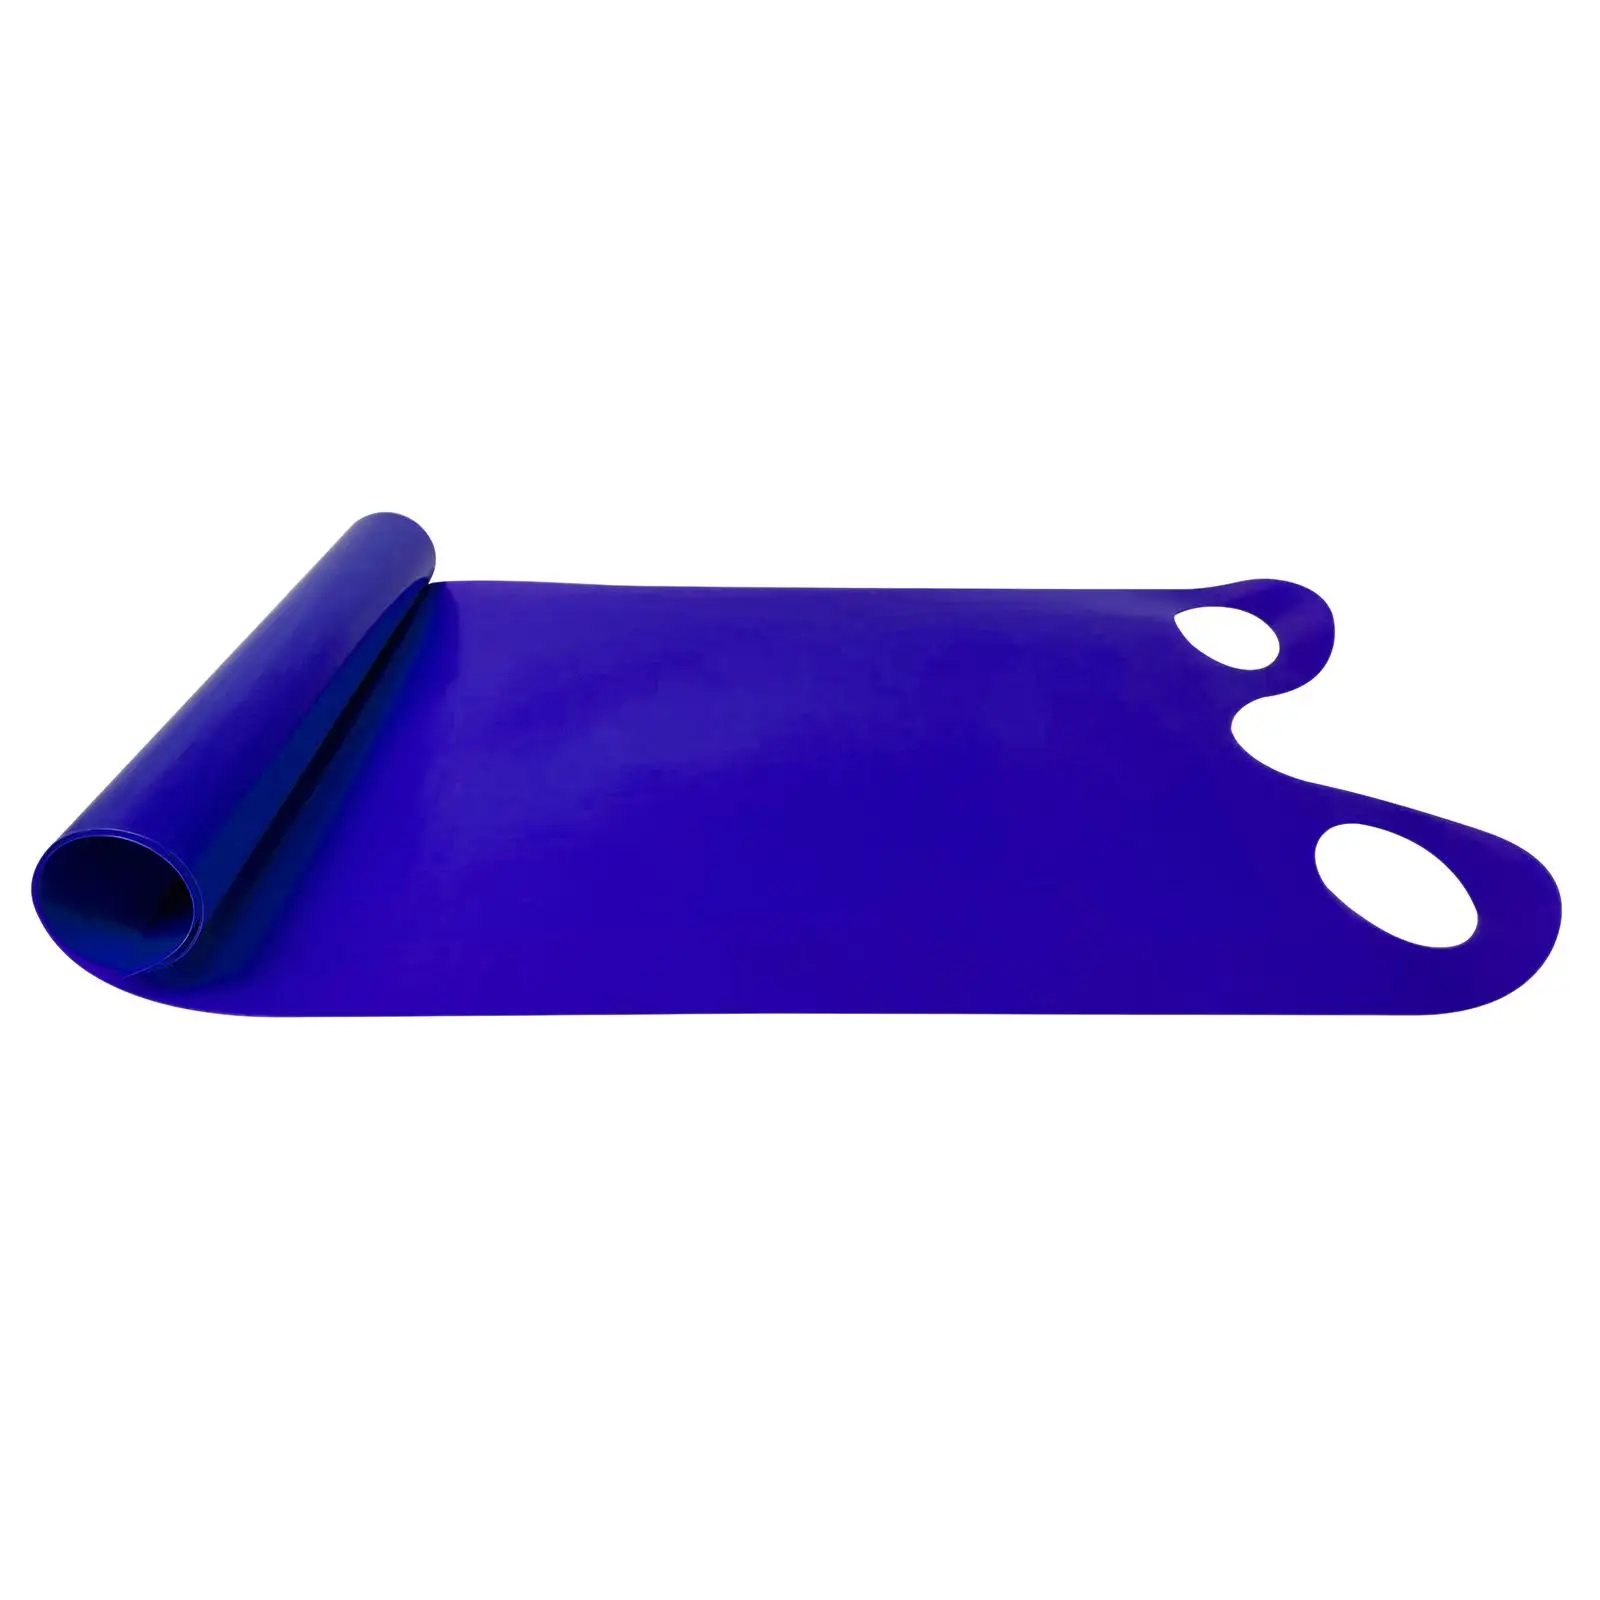 Snow Slide Mat Sledge High Speed Foldable with Handles 54